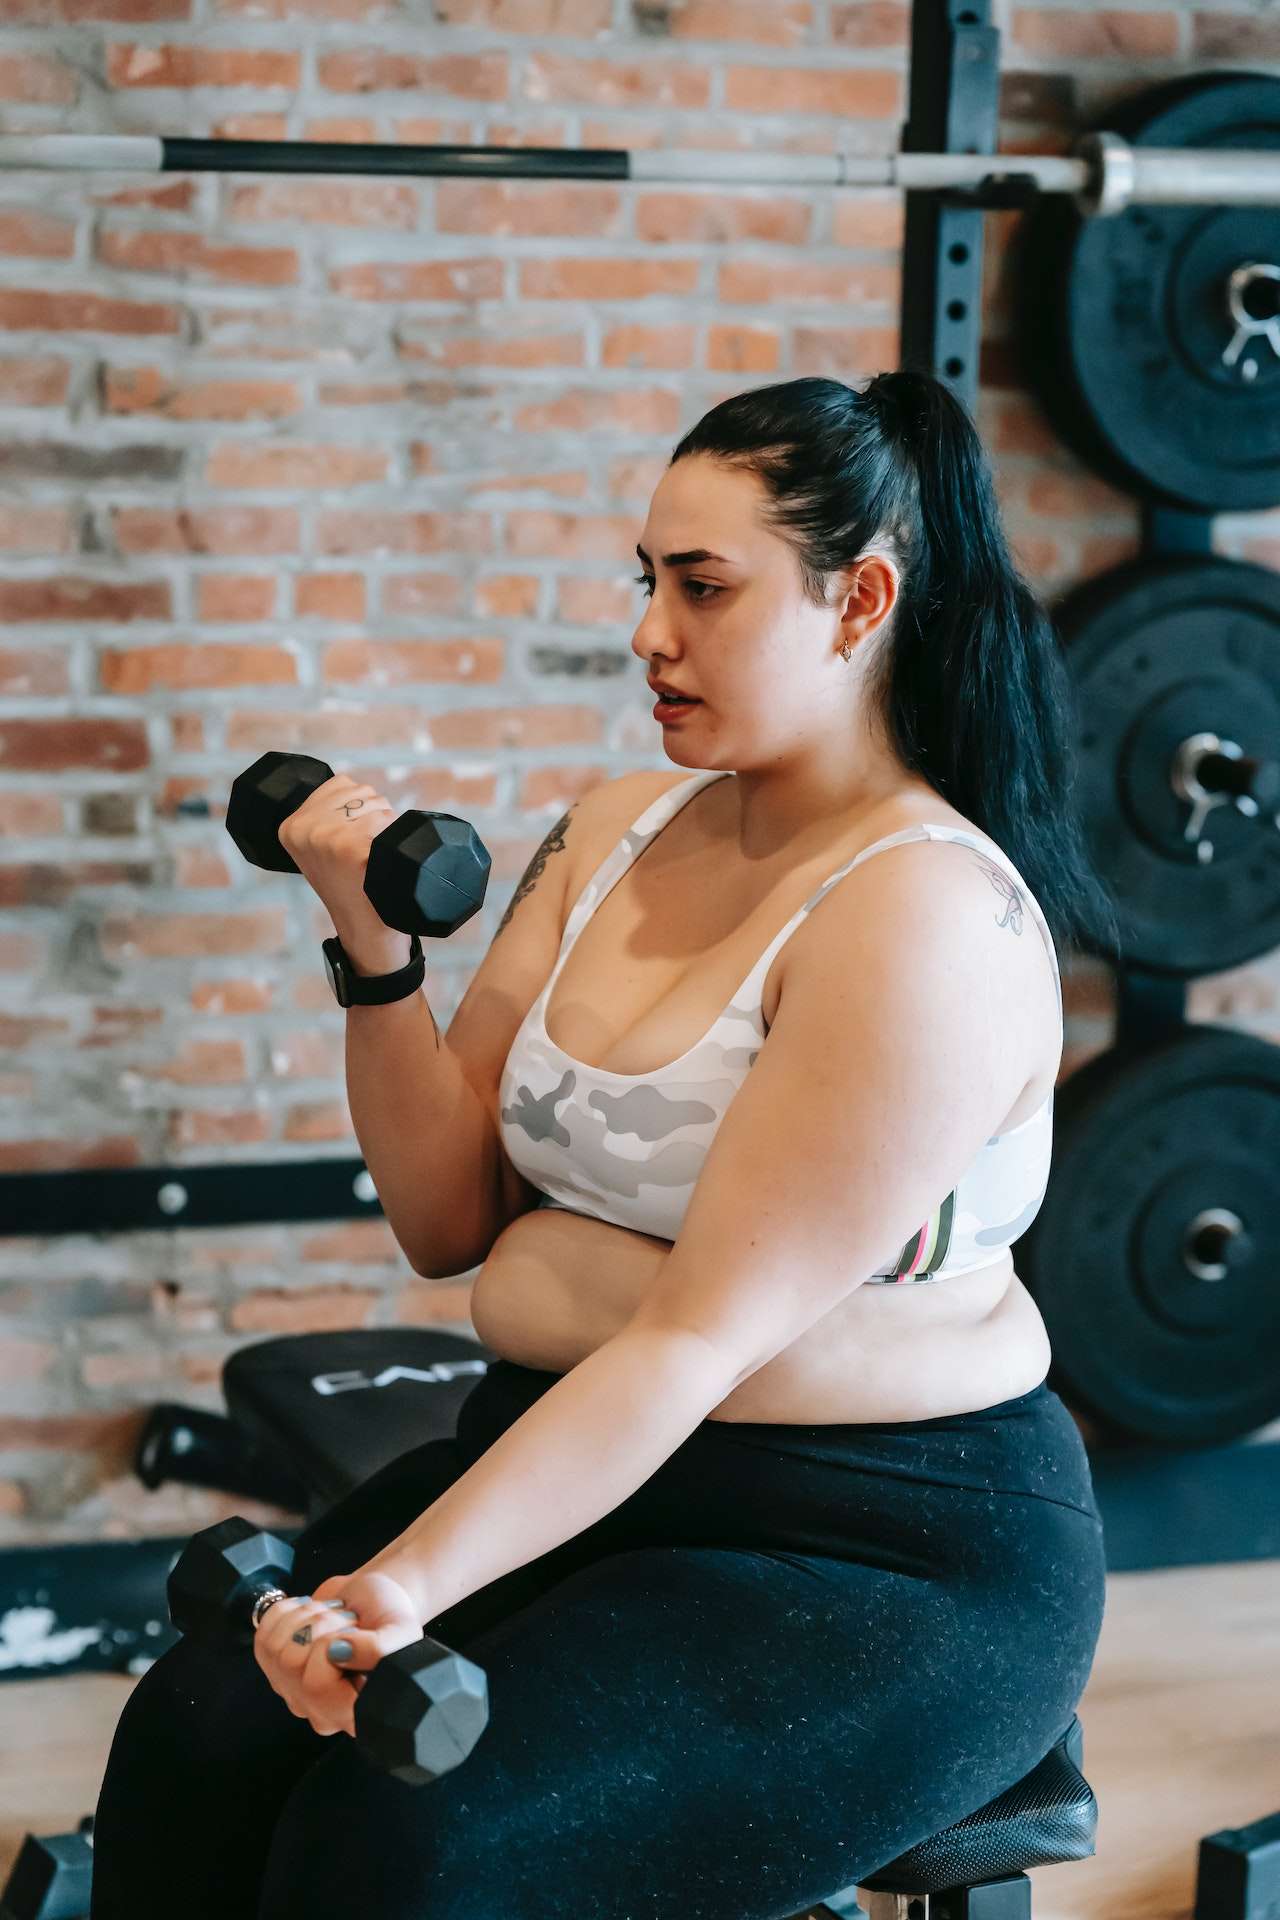 Obese woman lifting dumbbells in gym
